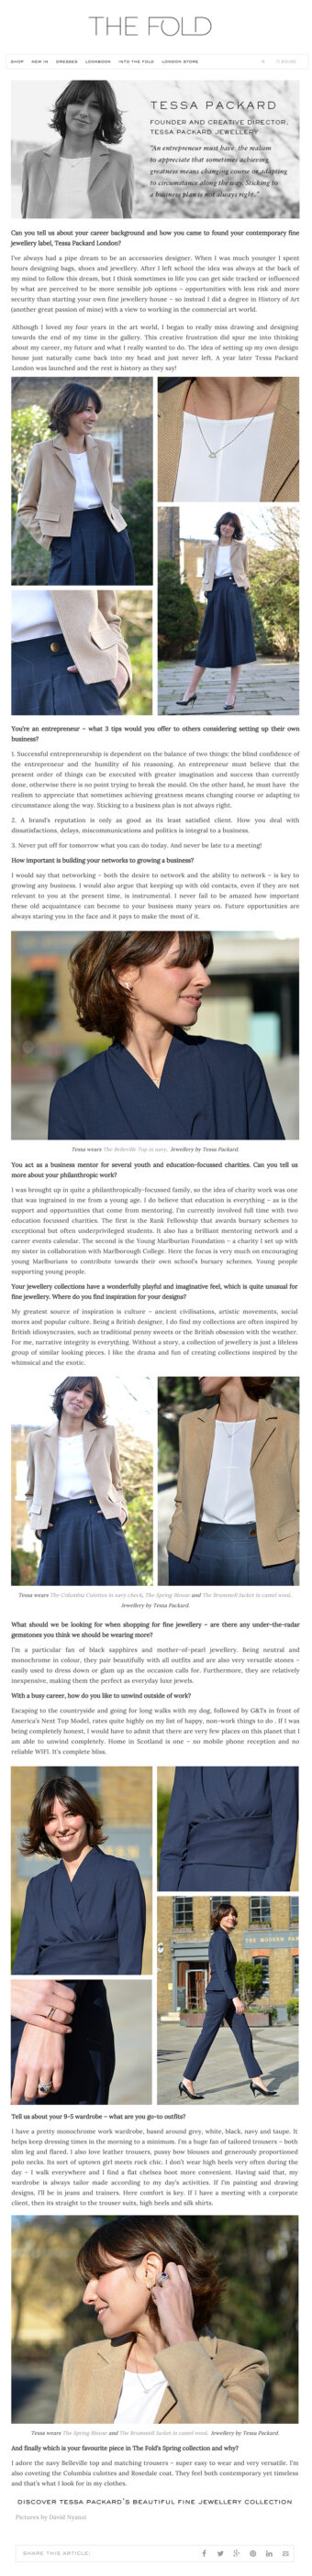 The fold London interview with Tessa Packard of Tessa Packard London Contemporary Fine Jewellery